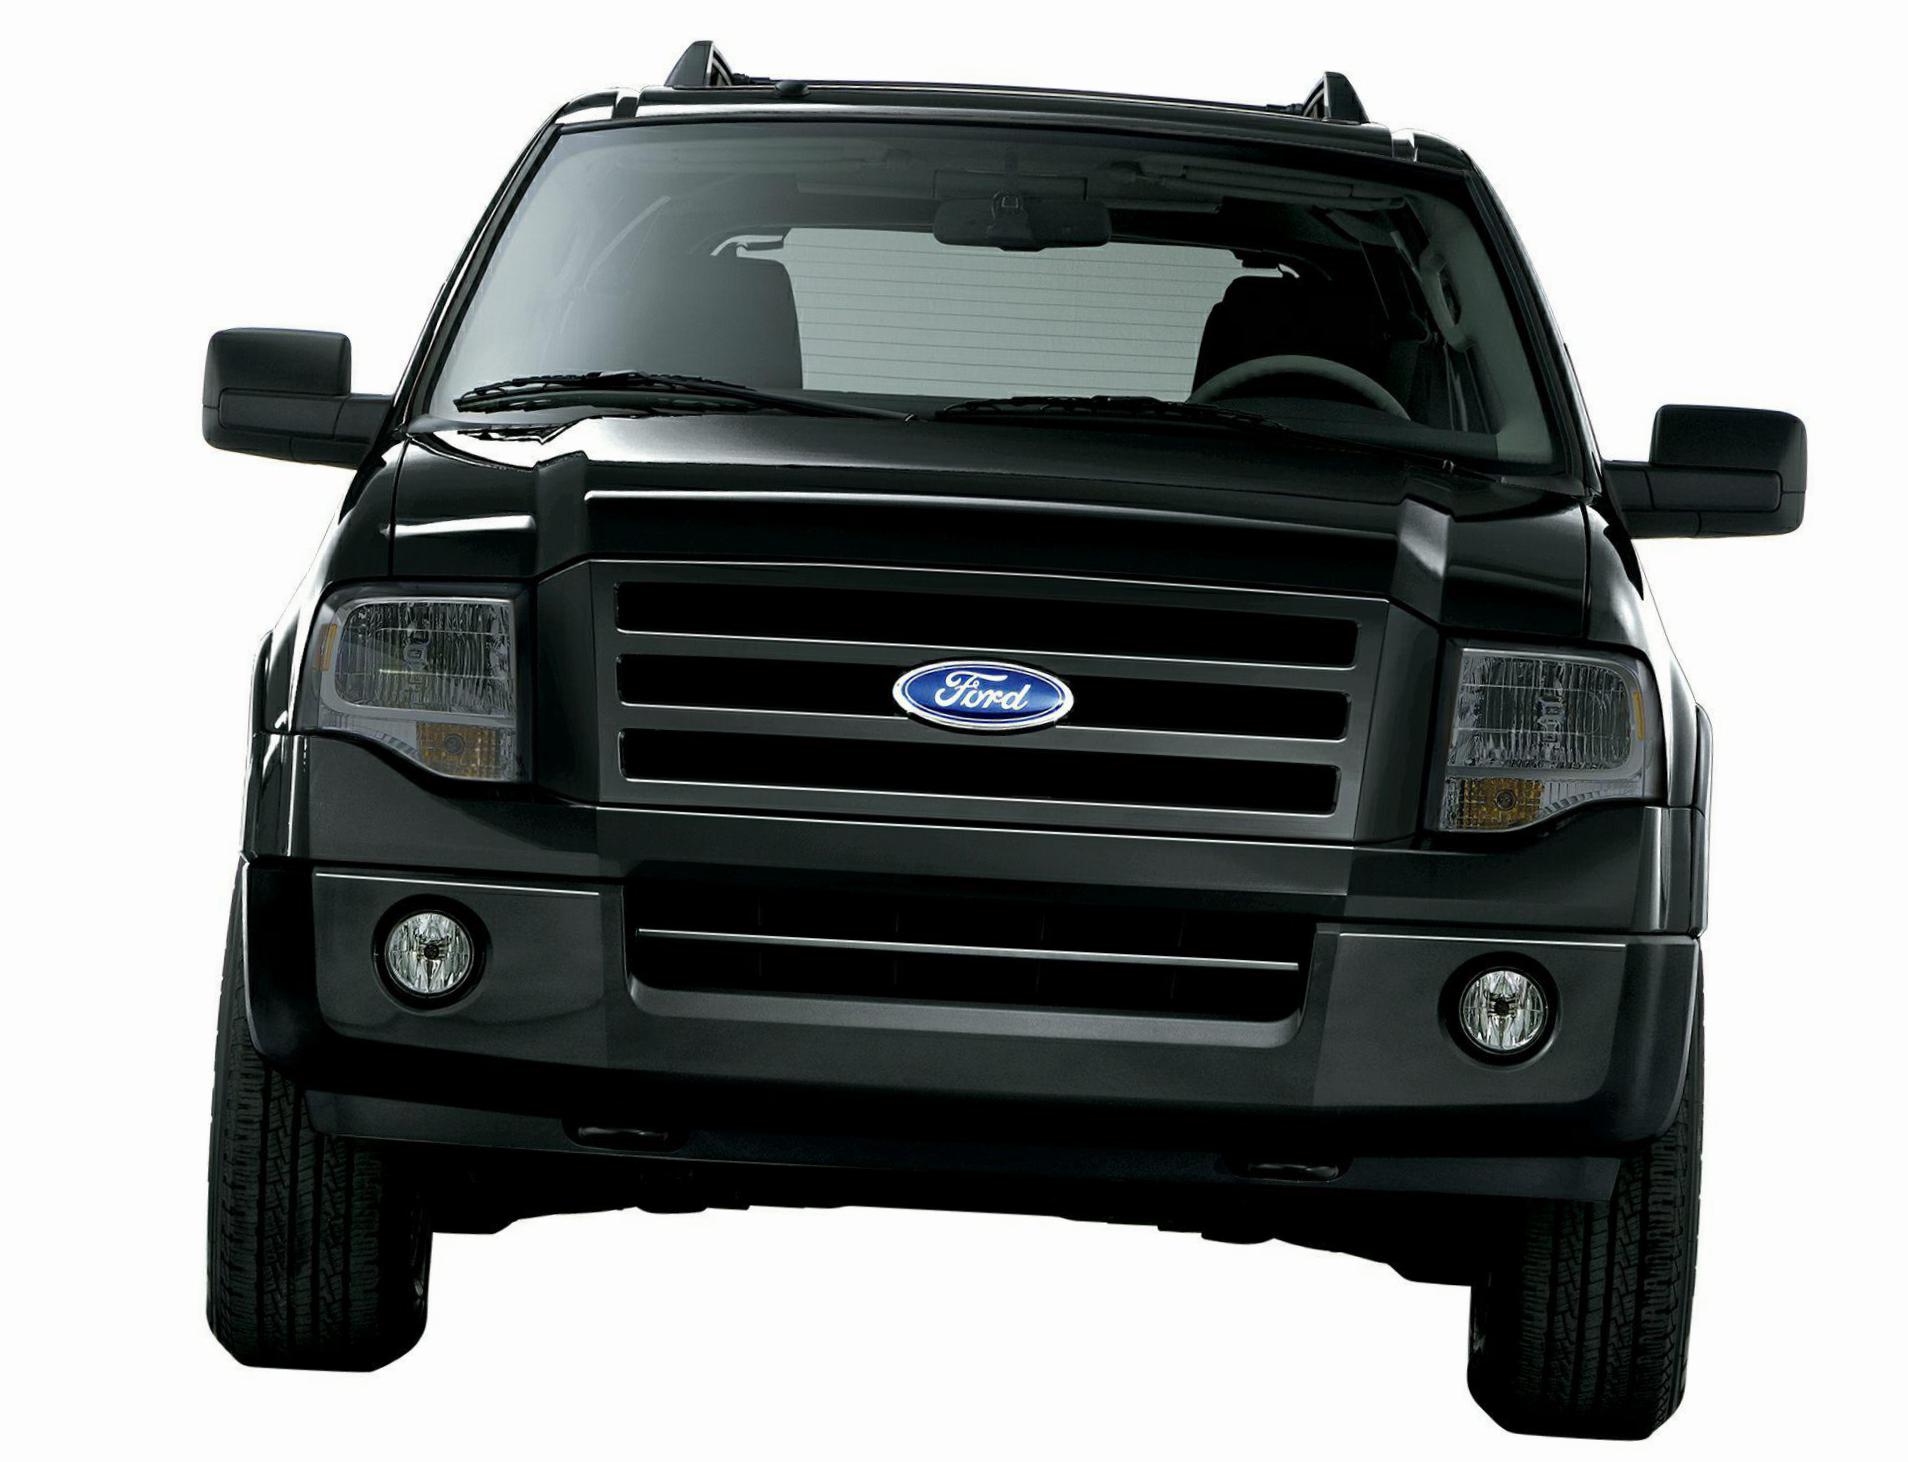 Expedition Ford Specifications 2006